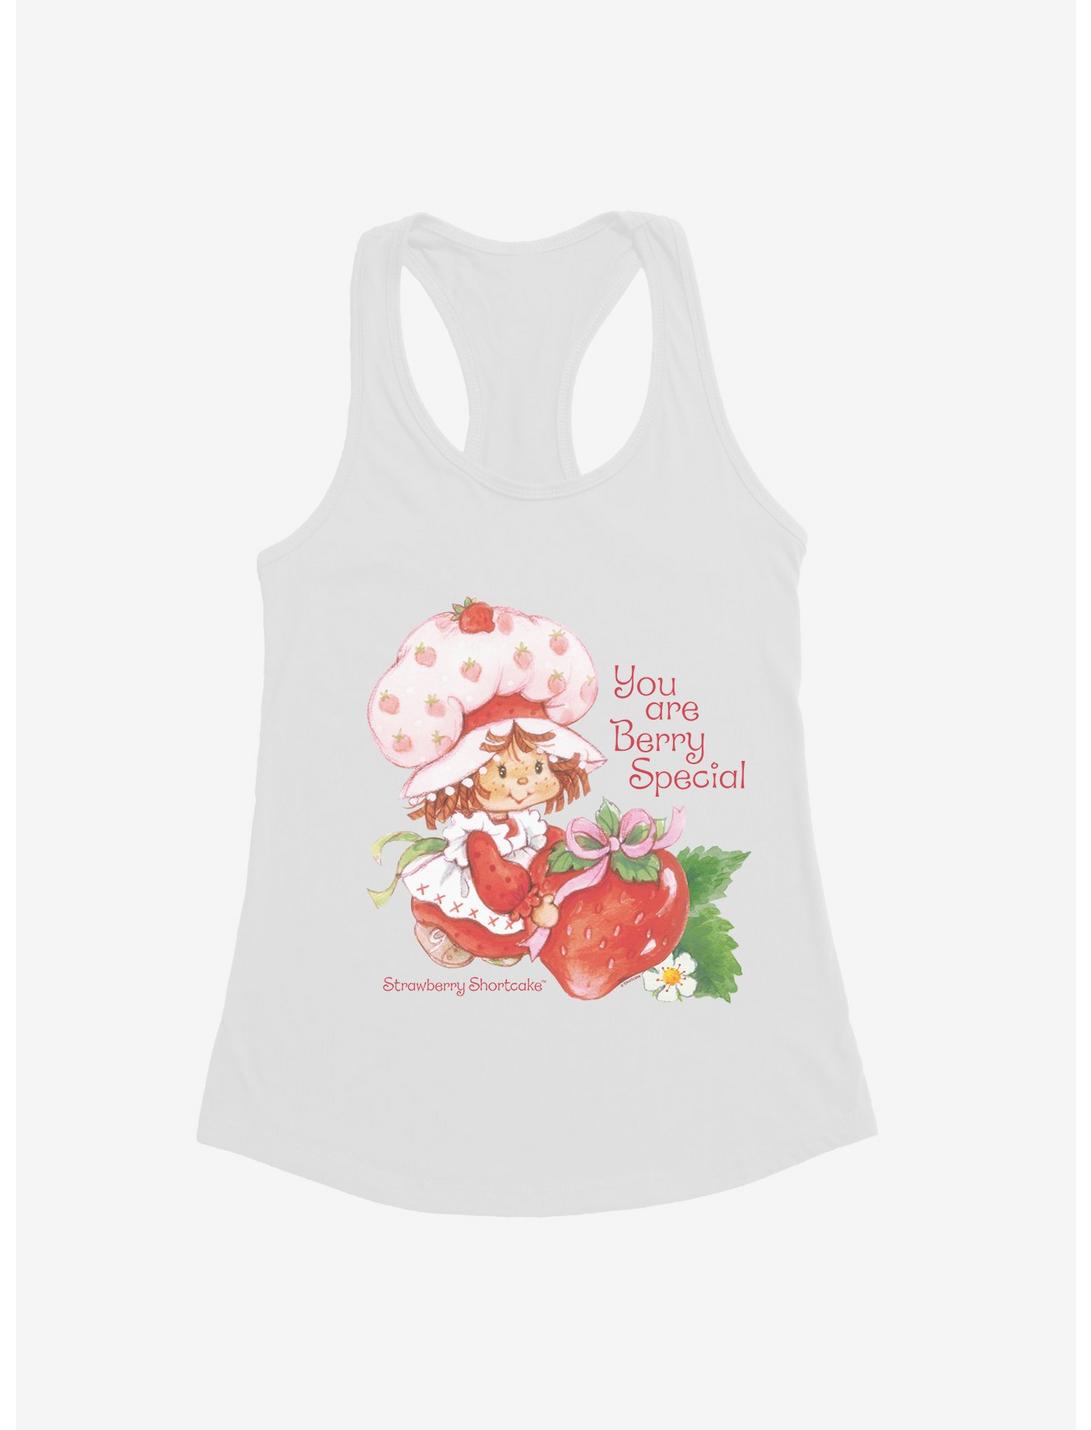 Strawberry Shortcake You Are Berry Special Womens Tank Top, WHITE, hi-res